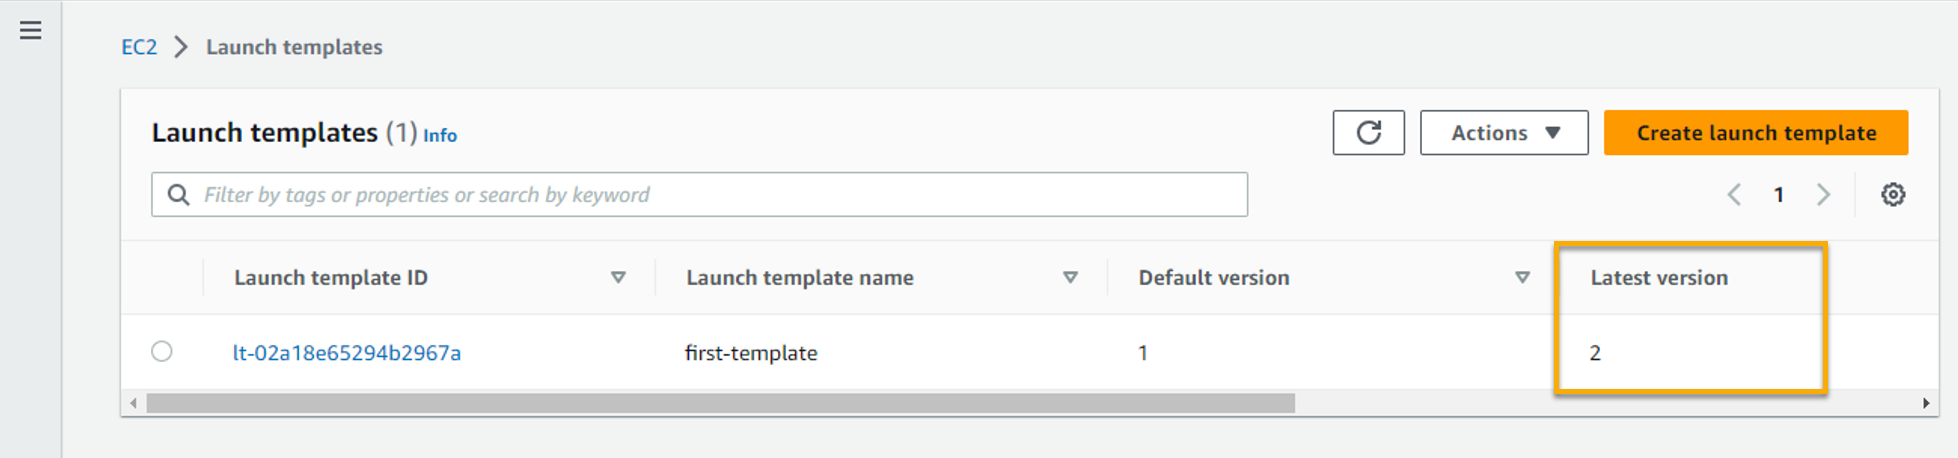 Verifying the launch template’s latest version